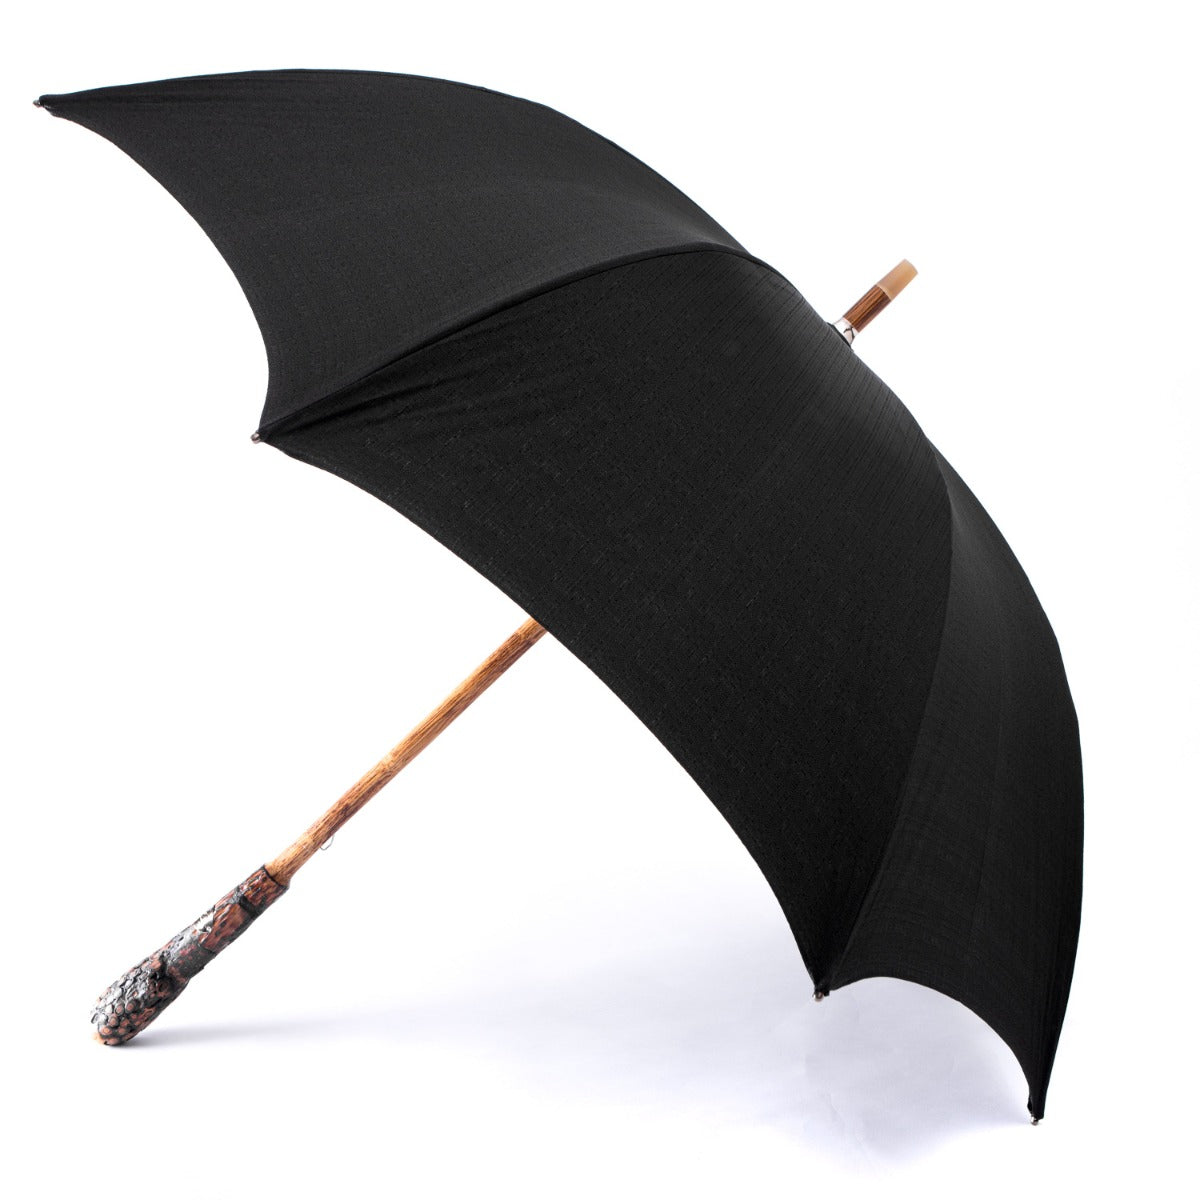 A Manila Root Solid Stick umbrella with an Imperial Black poly-cotton canopy by KirbyAllison.com.